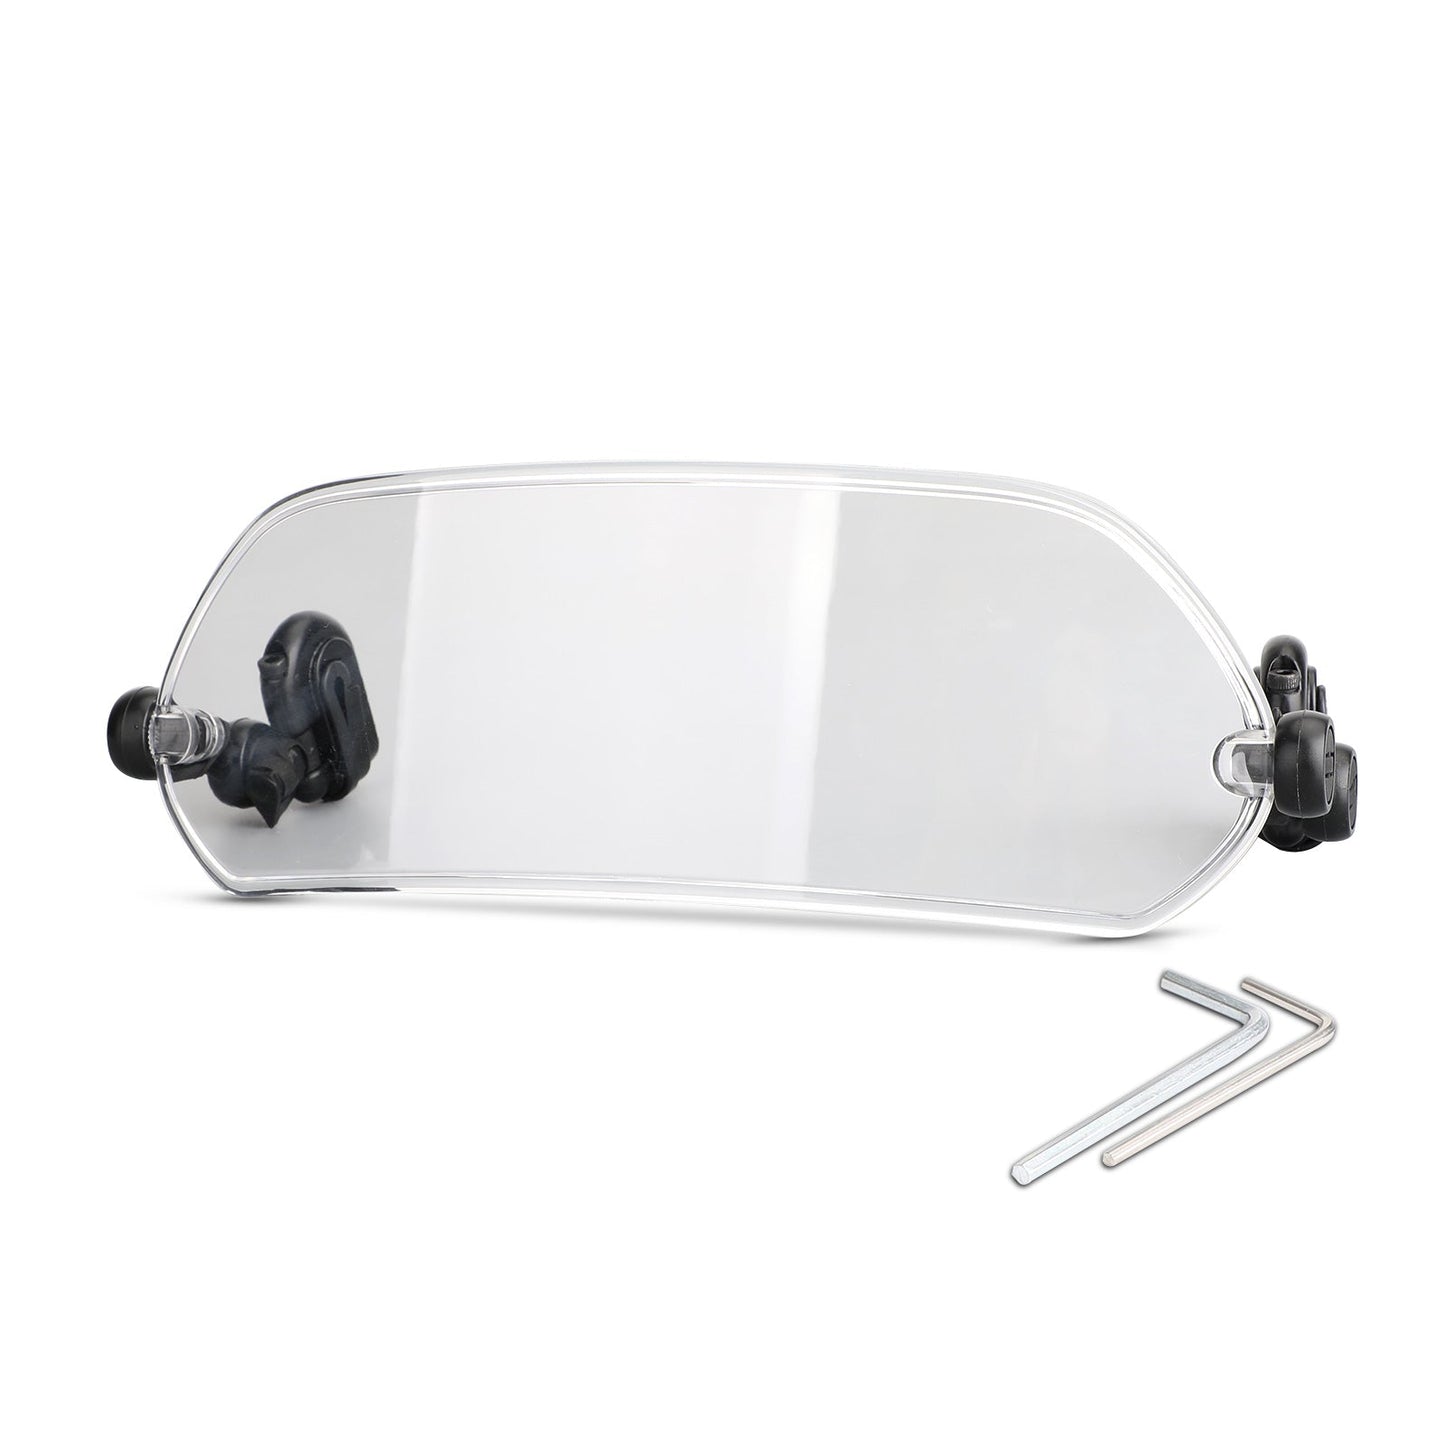 Universal Adjustable Clip On Windshield Extension Spoiler Wind Deflector Clear